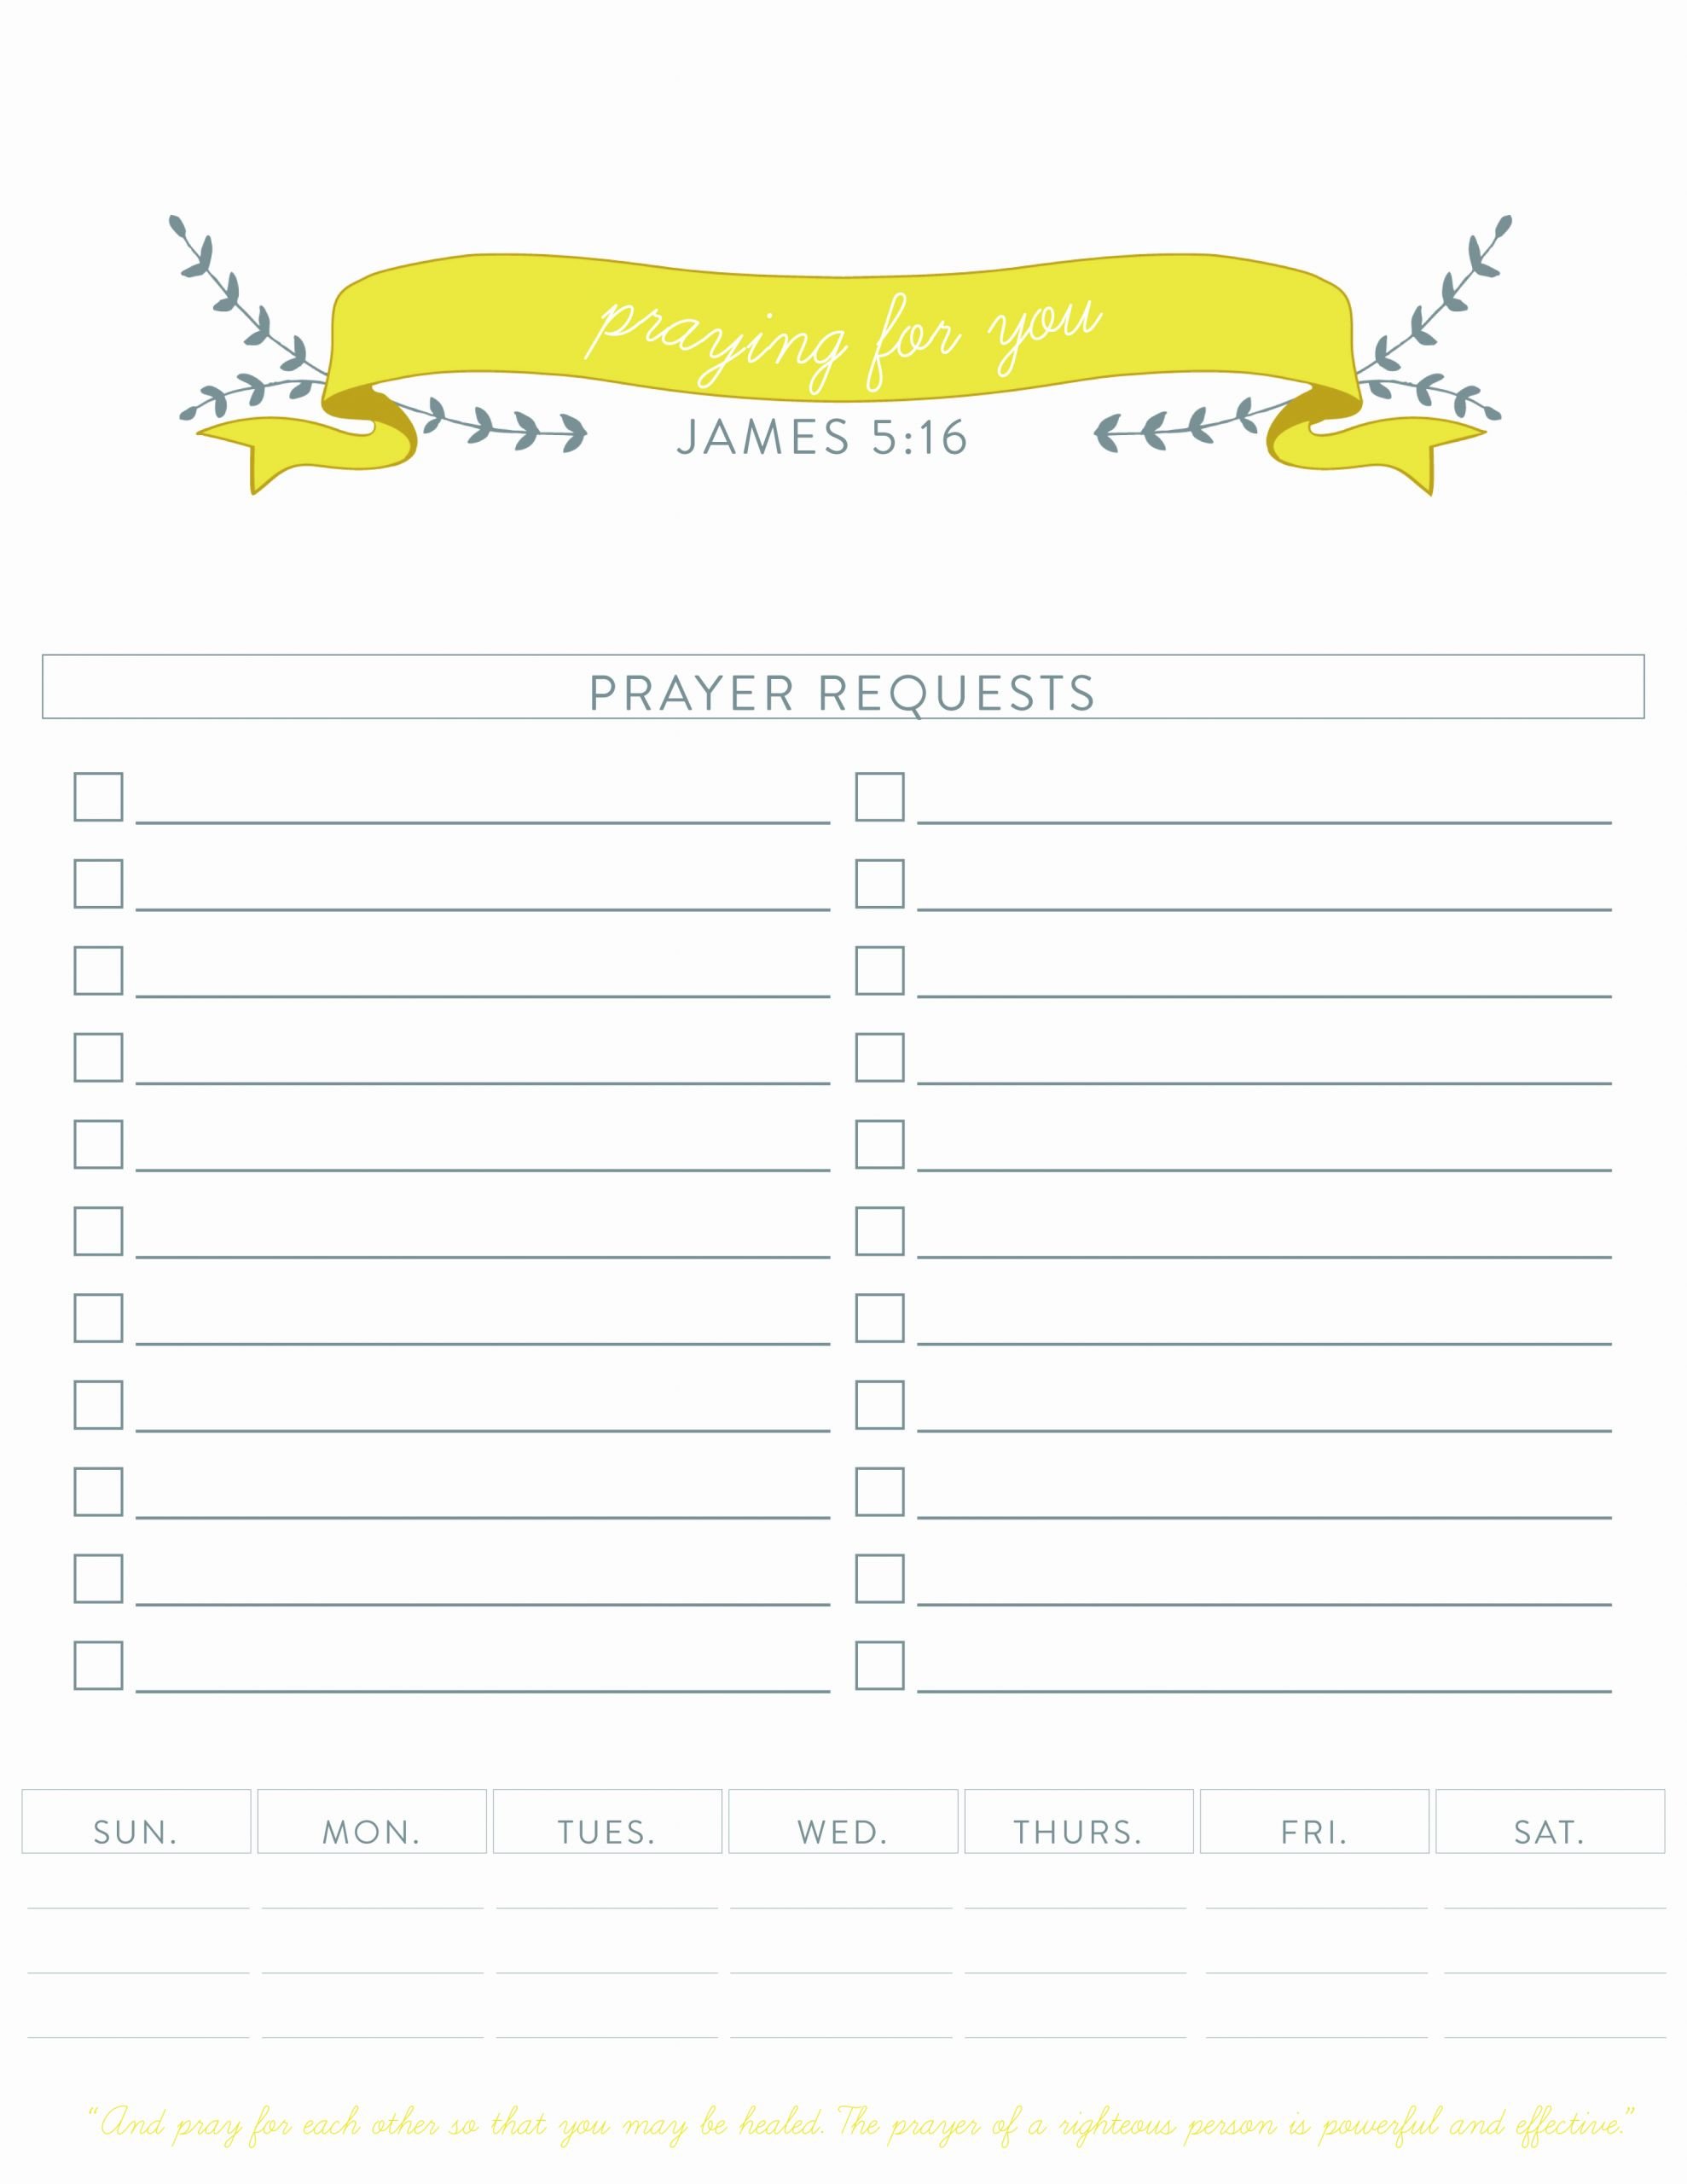 Printable Prayer Request form Beautiful Prayer Request Printable From the Small Seed